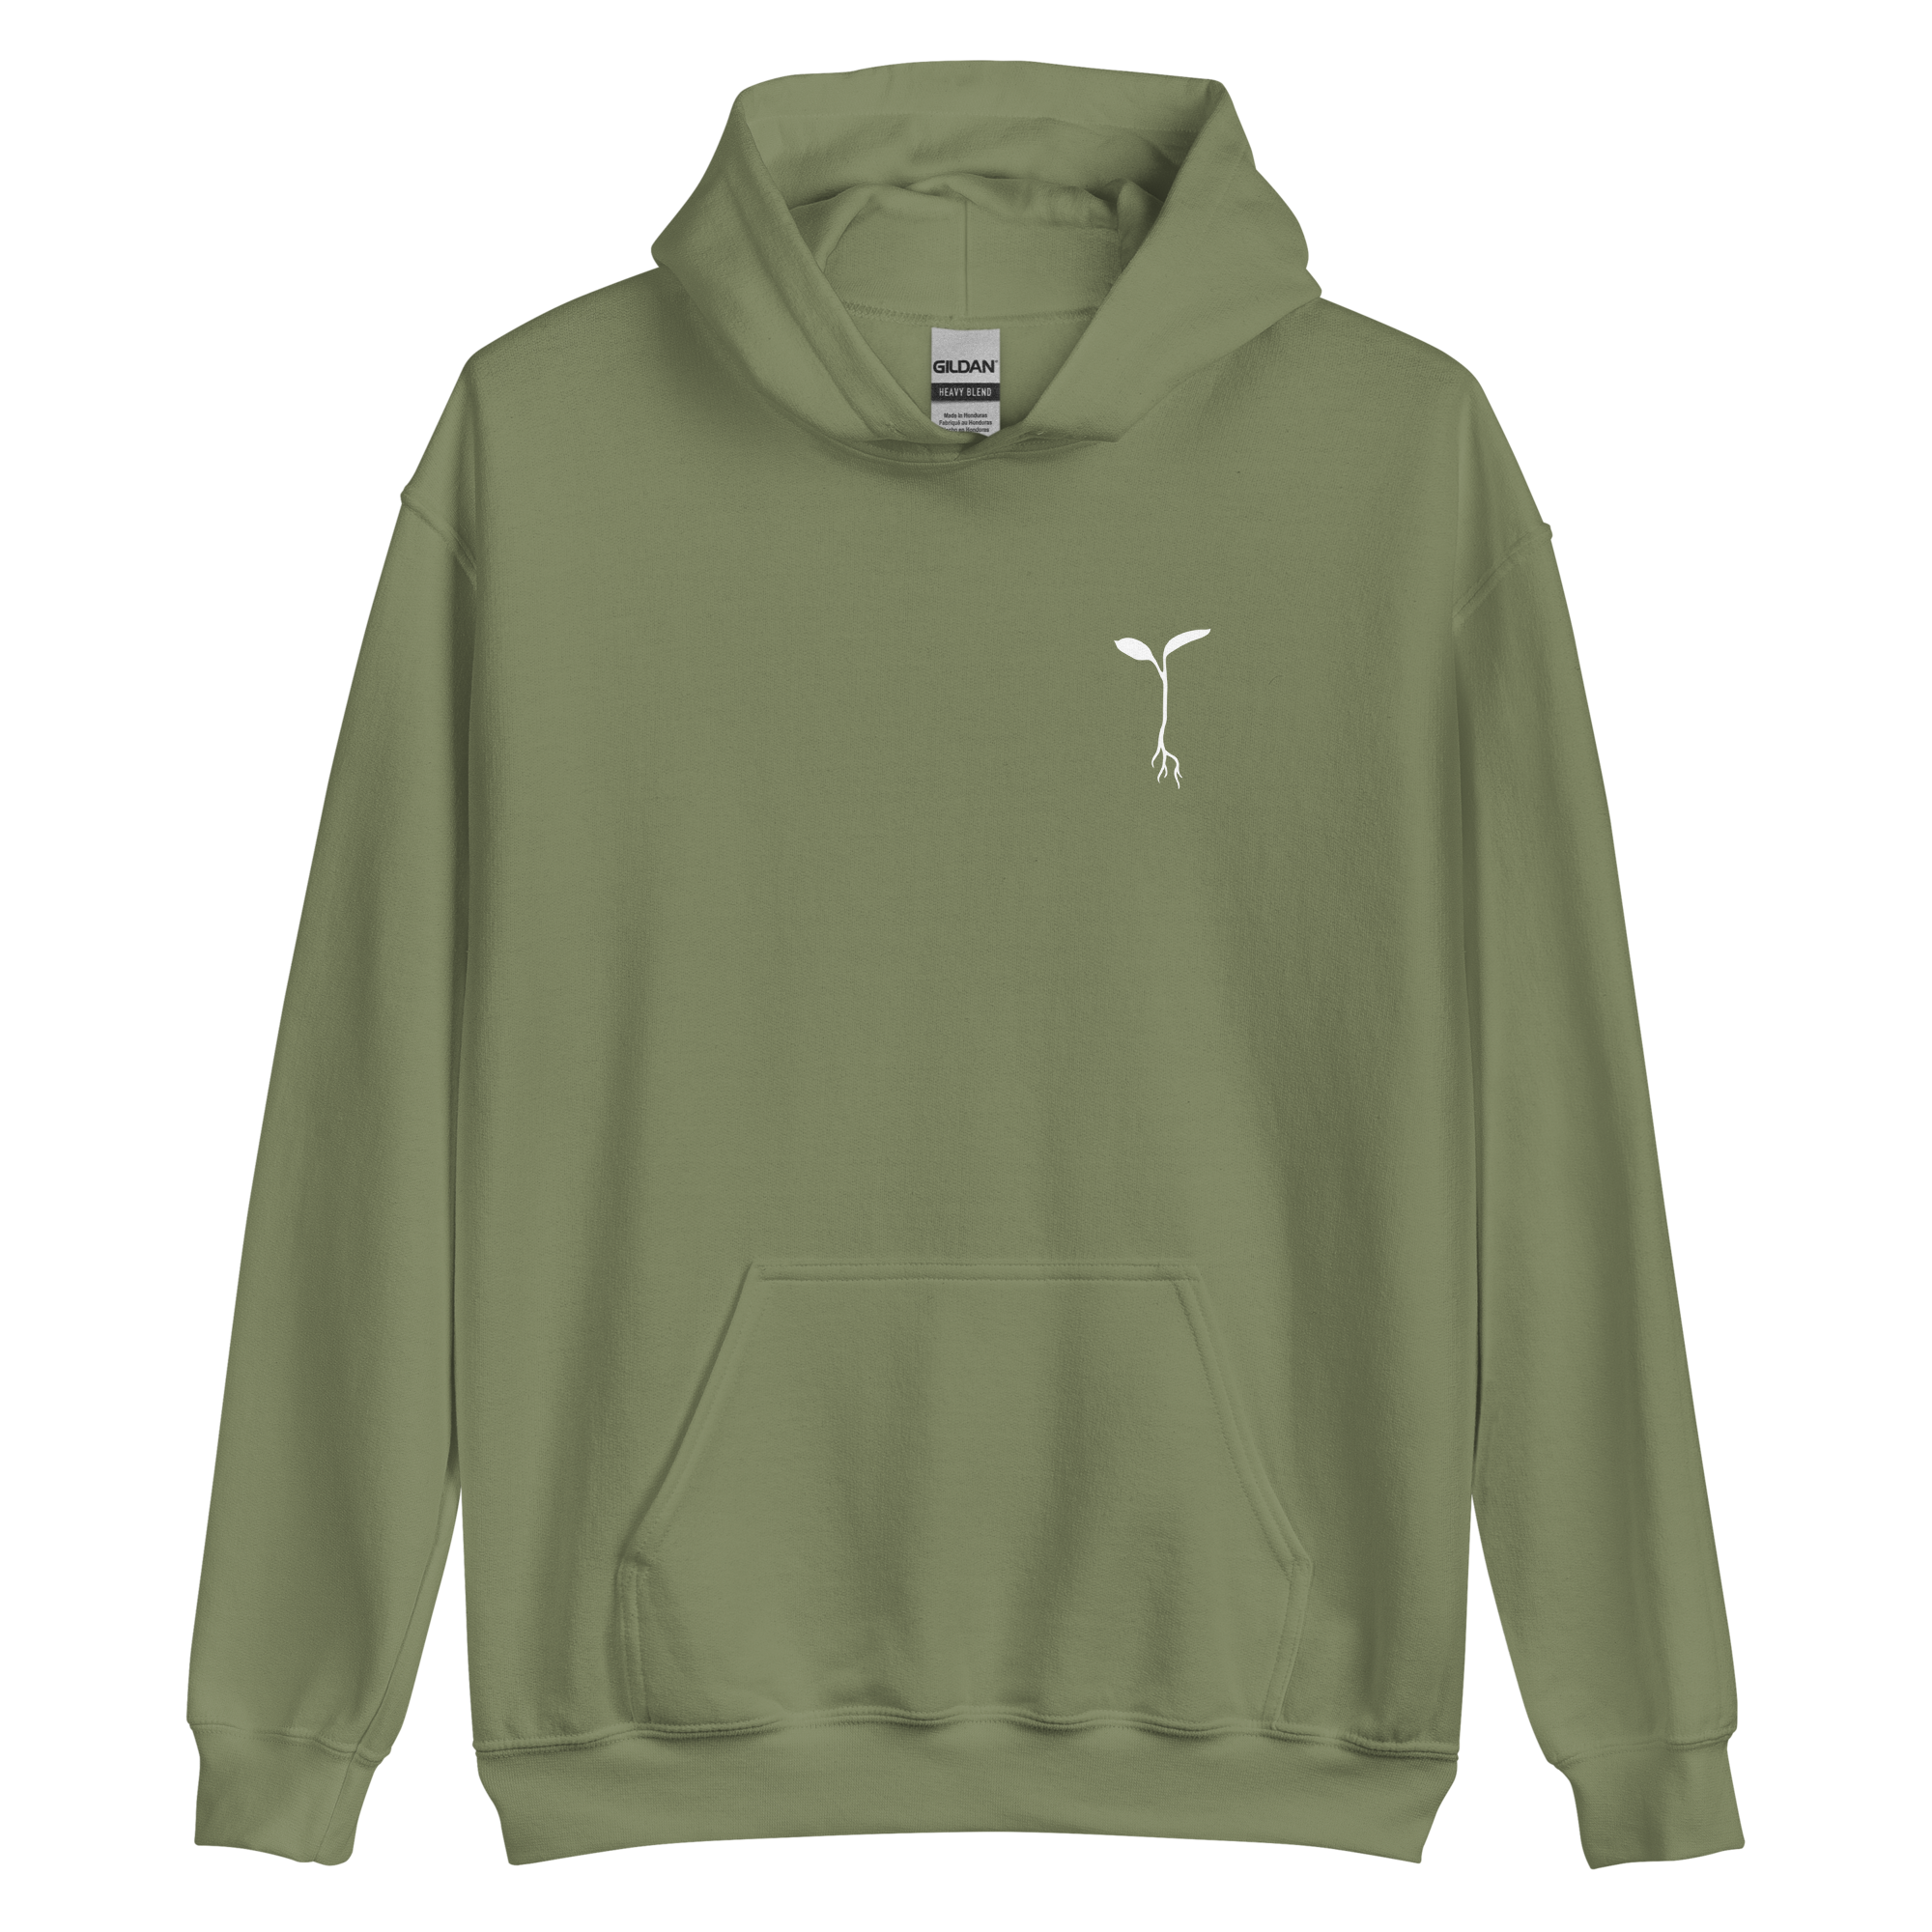 unisex-heavy-blend-hoodie-military-green-front-660c42e6bf64c